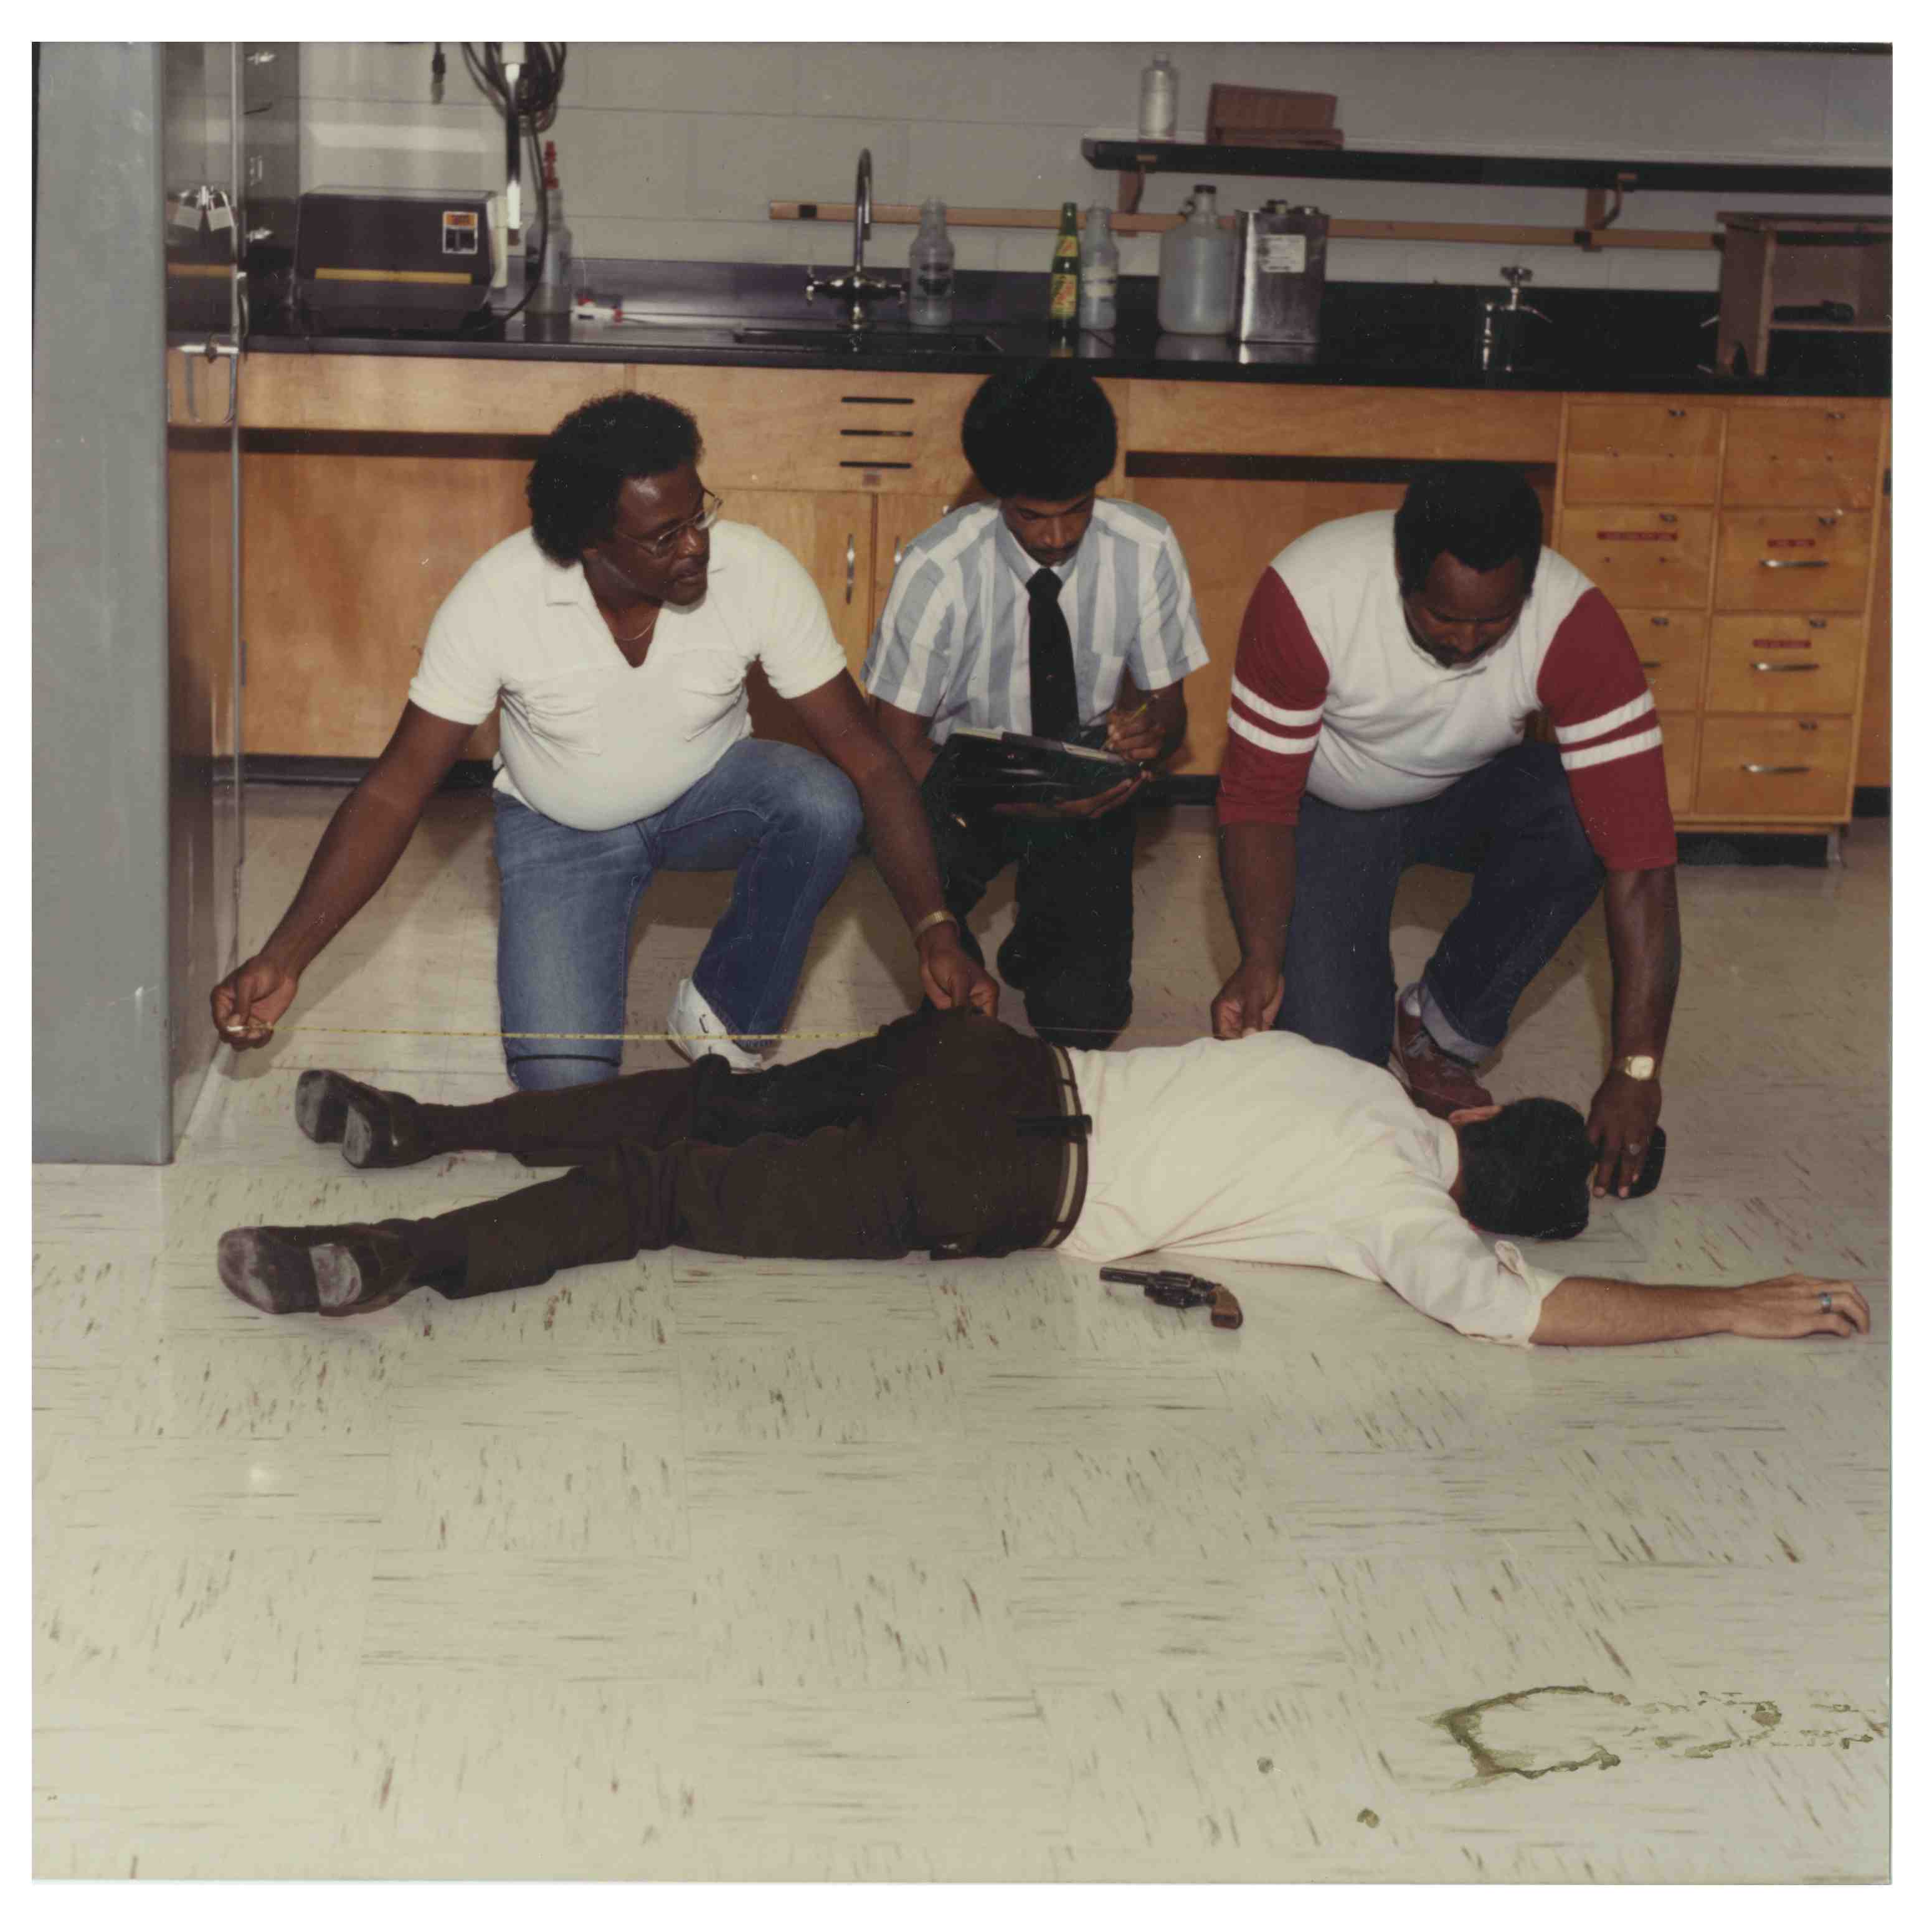 Police Science students, 1980s